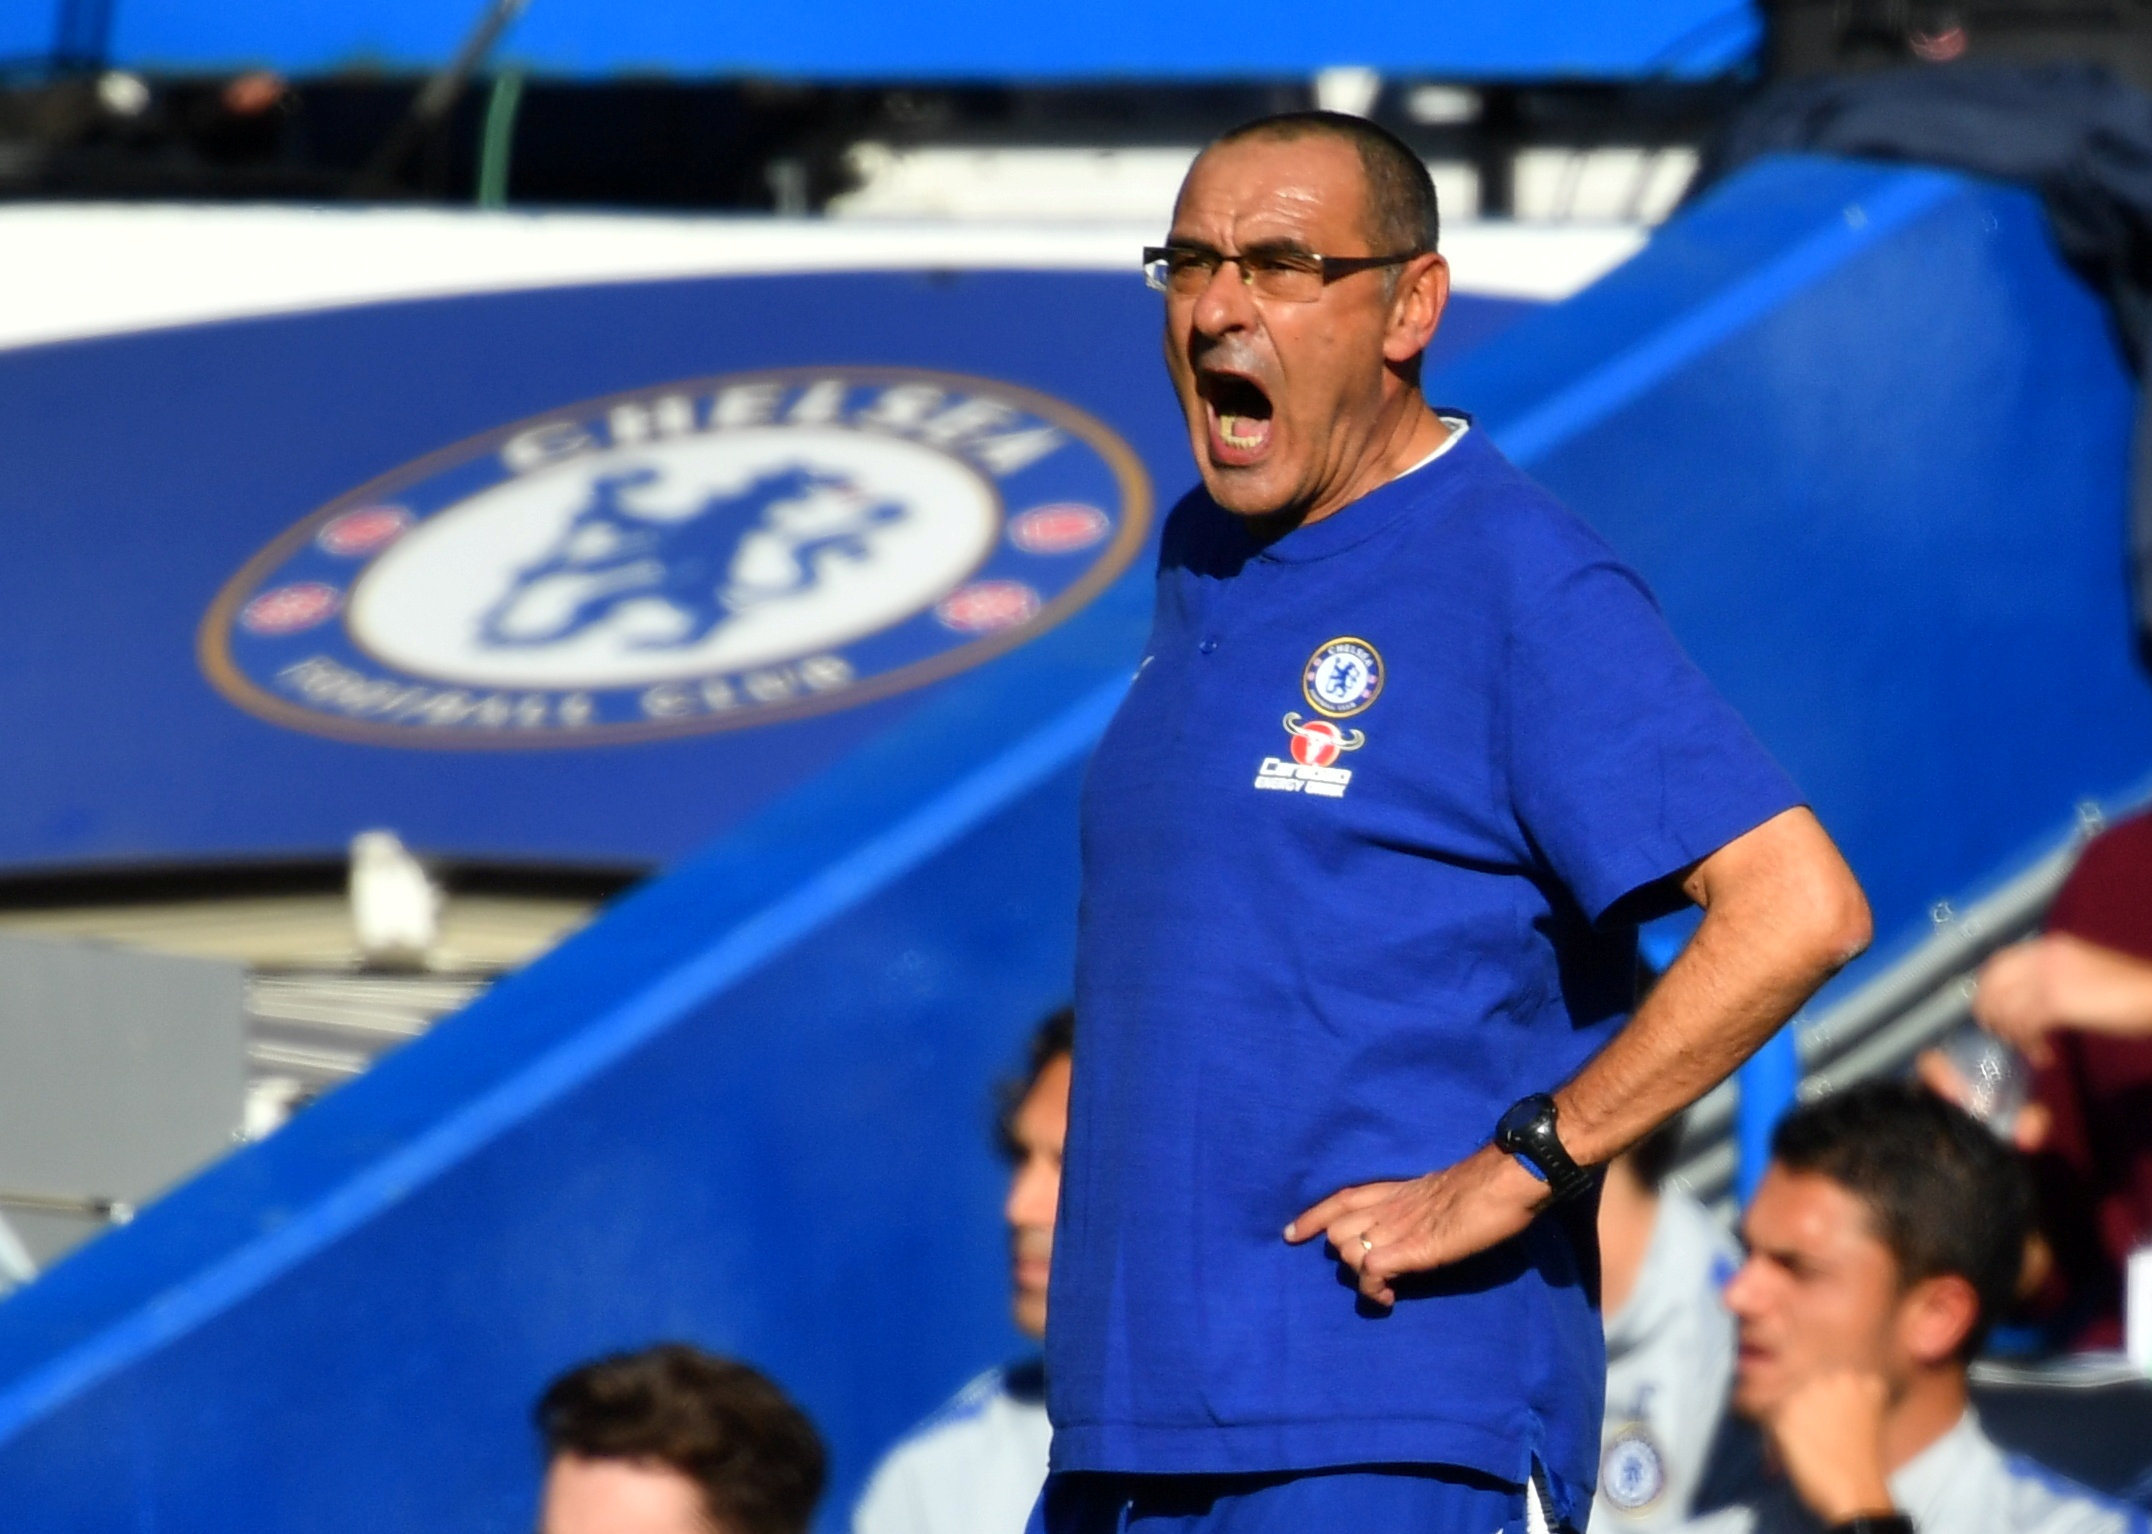 Football: Chelsea's Sarri slams players for ditching gameplan in United draw